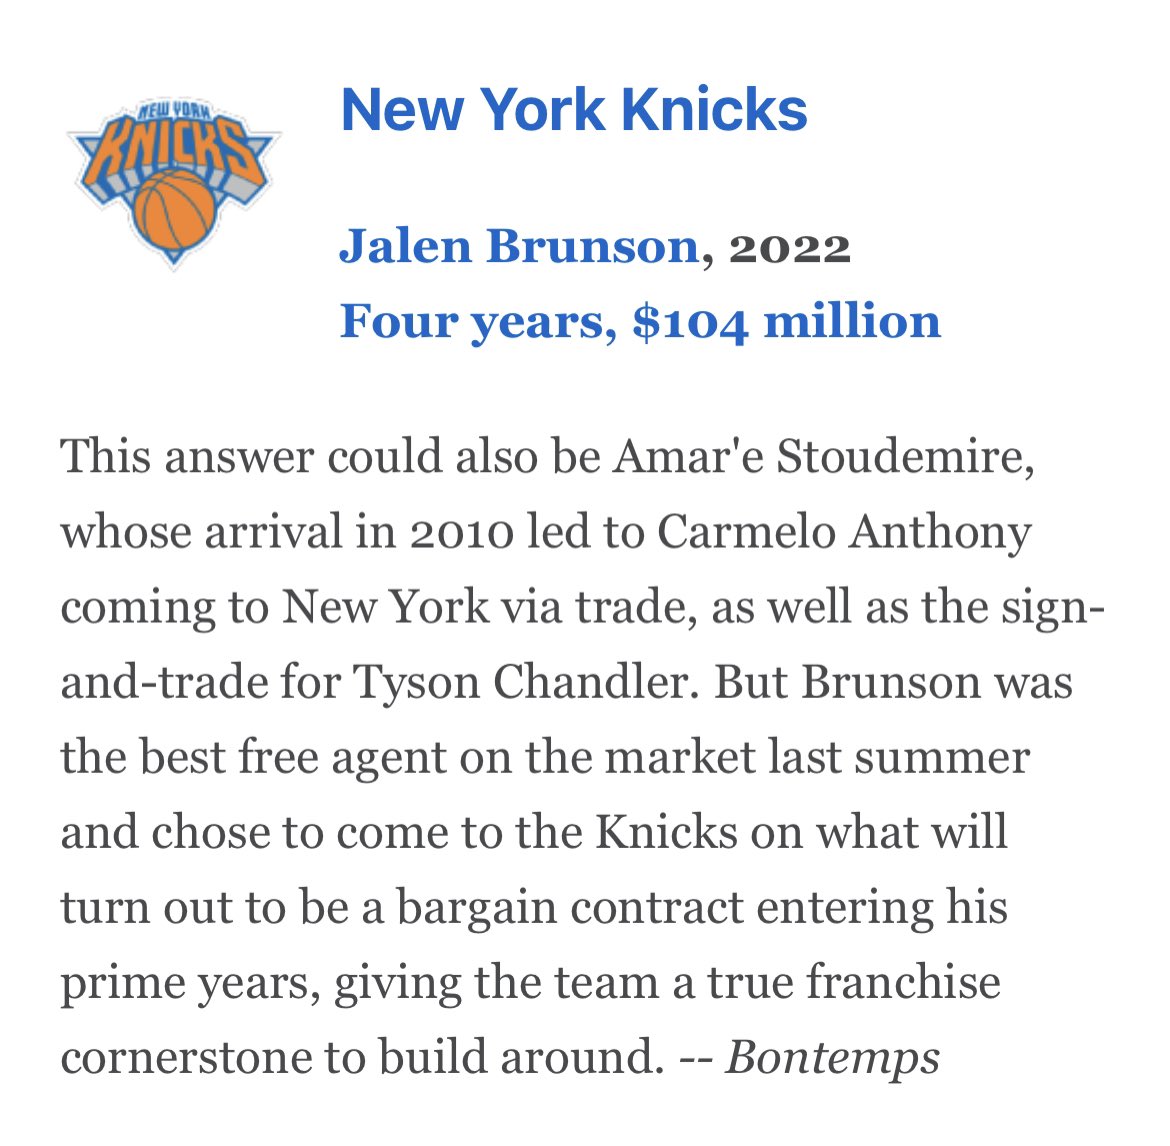 ESPN names Jalen Brunson as the Knicks most impactful free-agent signing of the last decade.